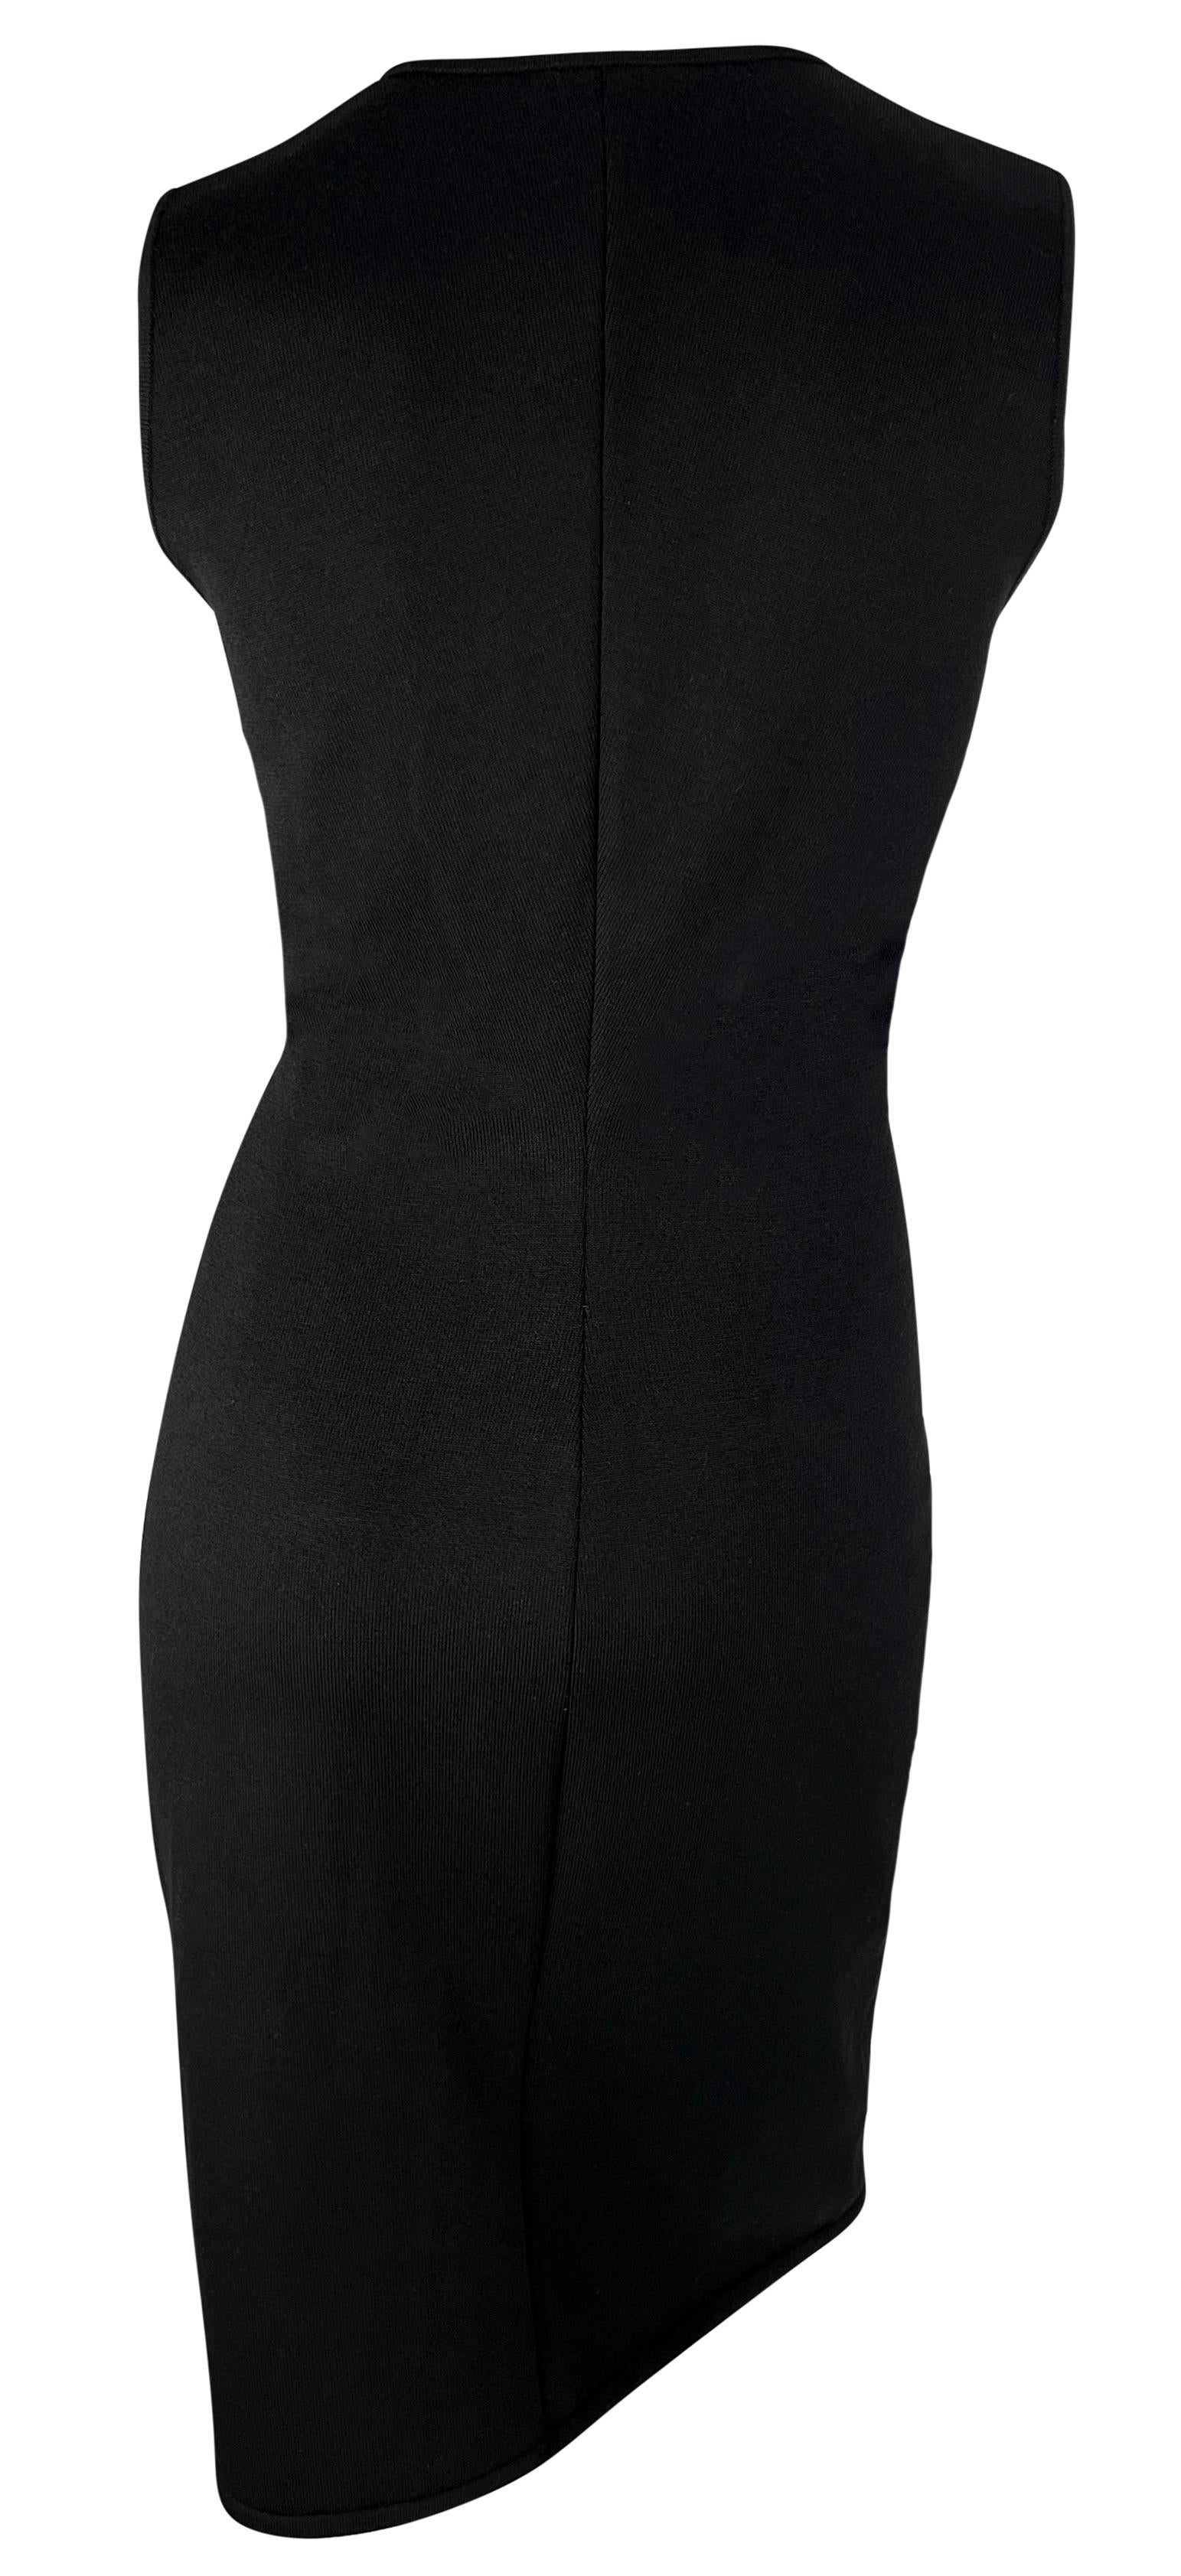 S/S 2002 Gianni Versace by Donatella Black Bodycon Hook Eye Plunging Knit Dress For Sale 1